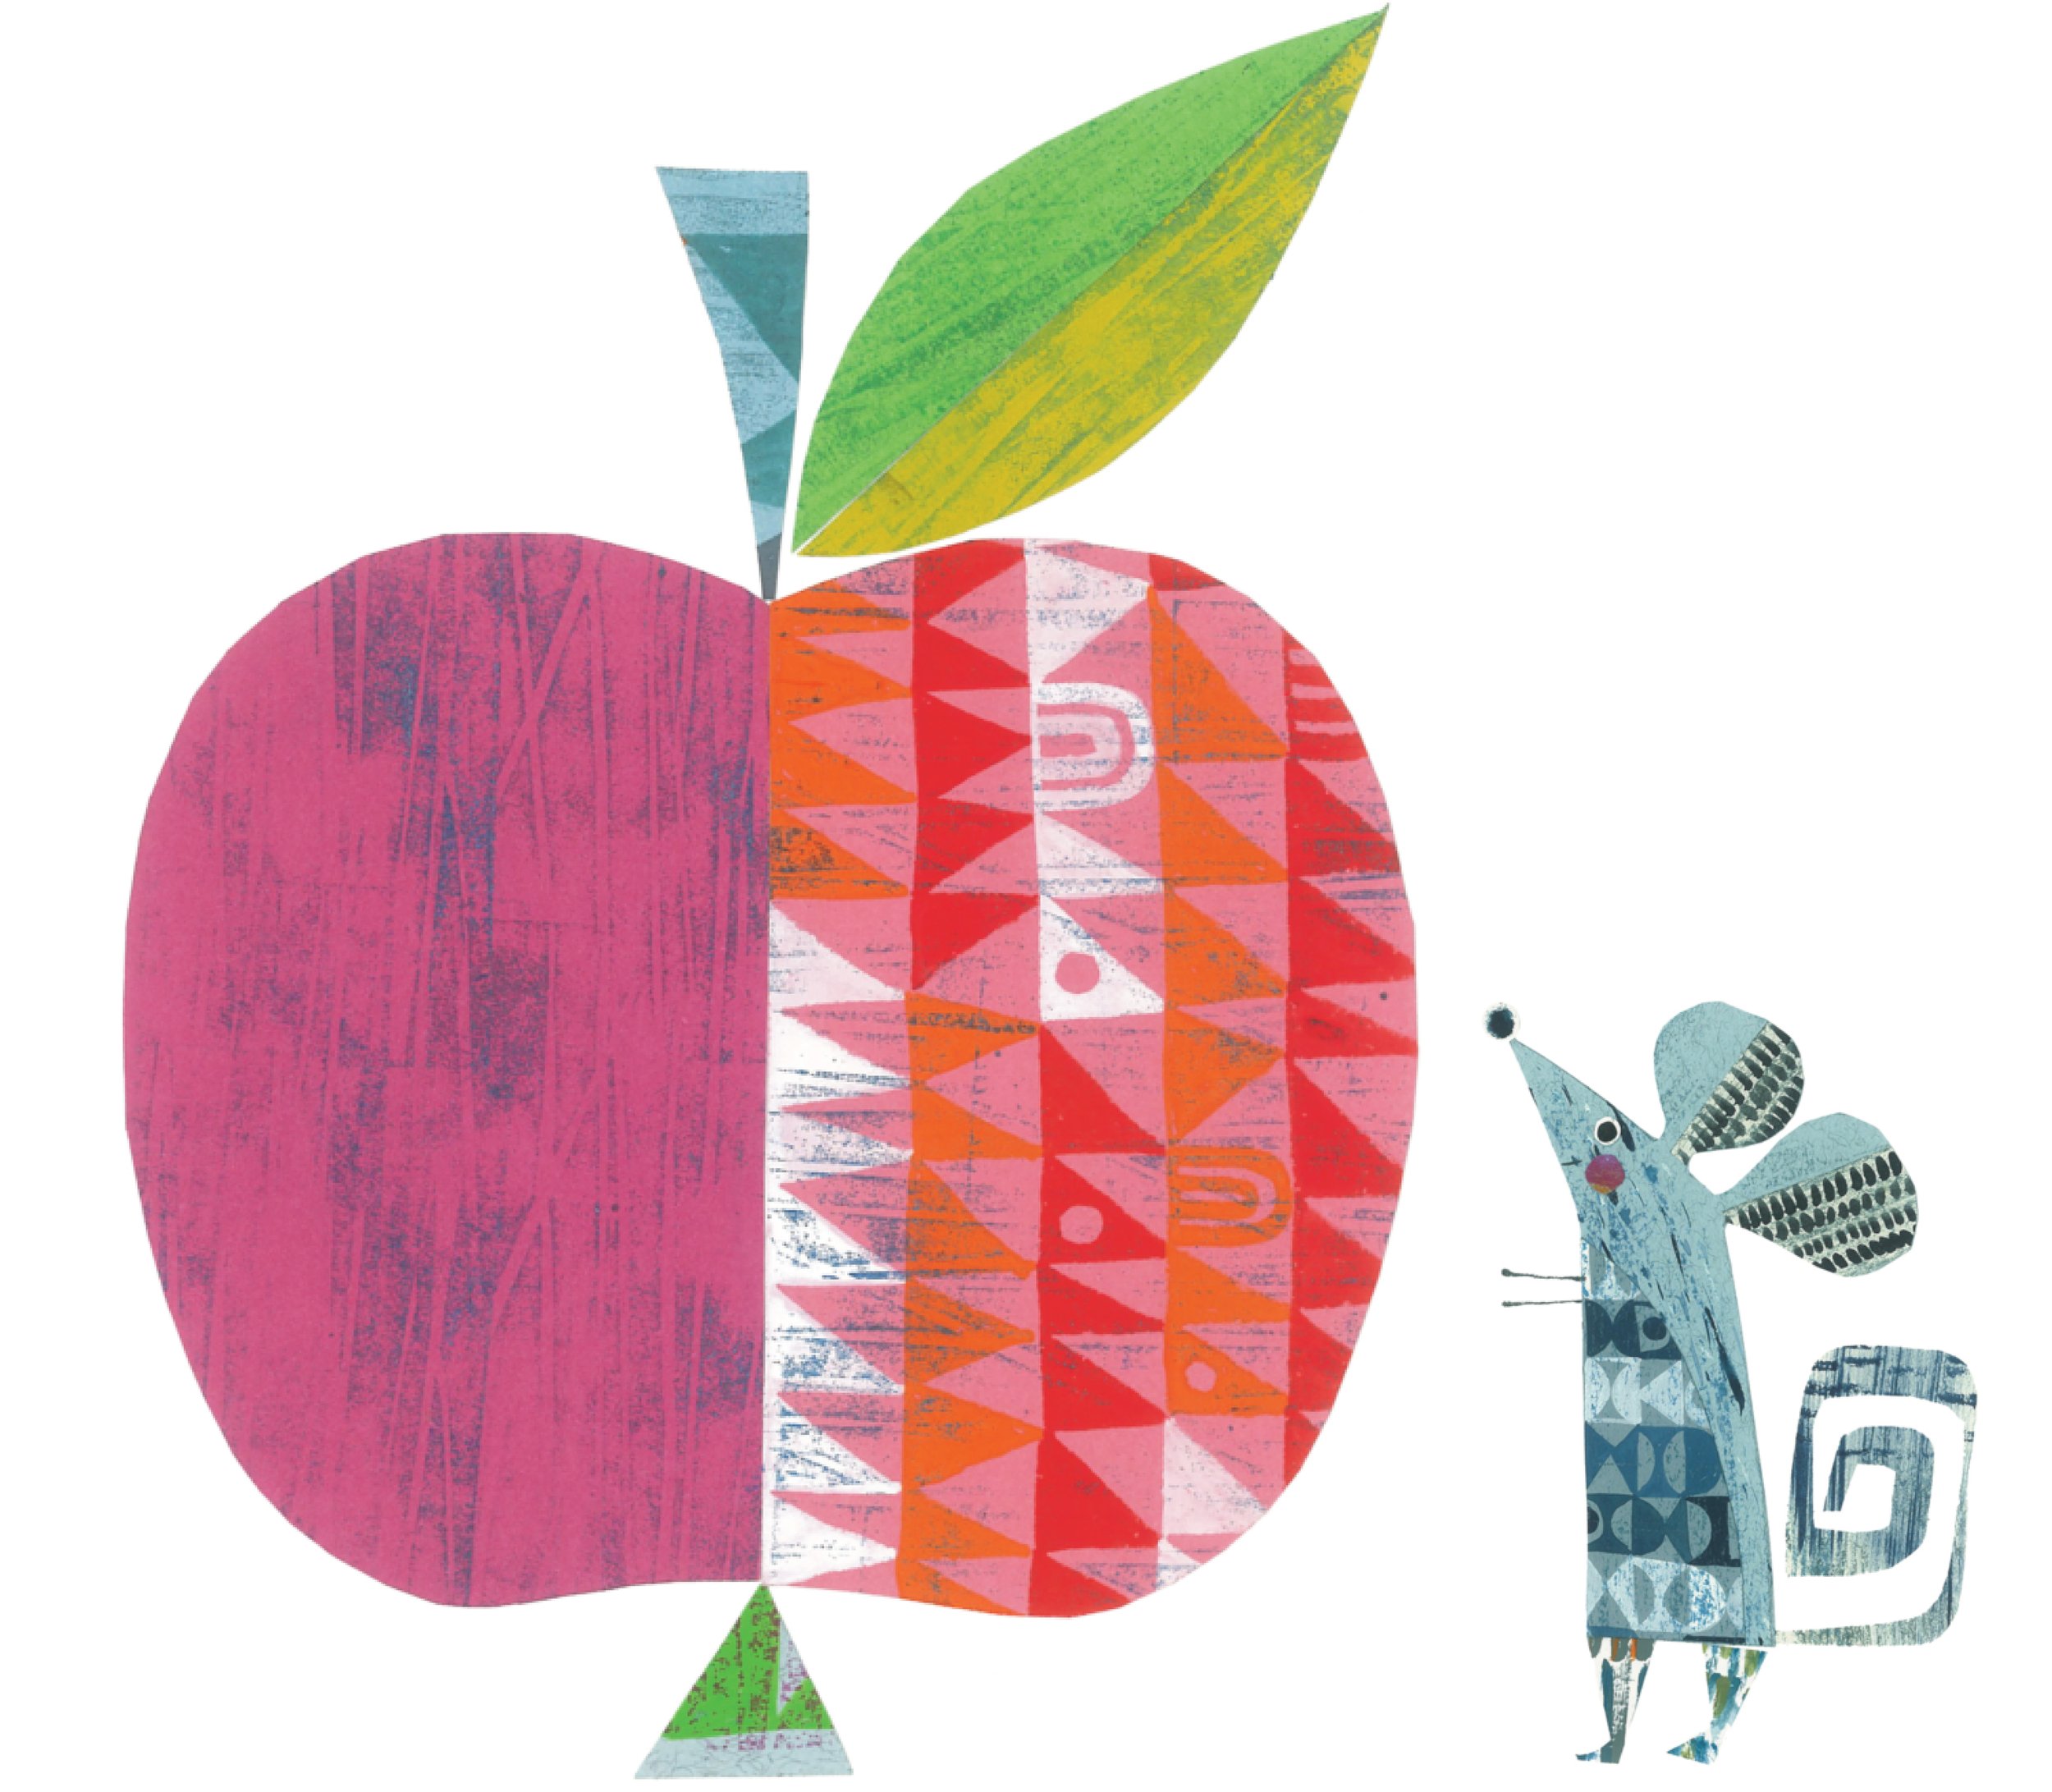 clare-youngs-mouse-and-apple-illustration.jpg